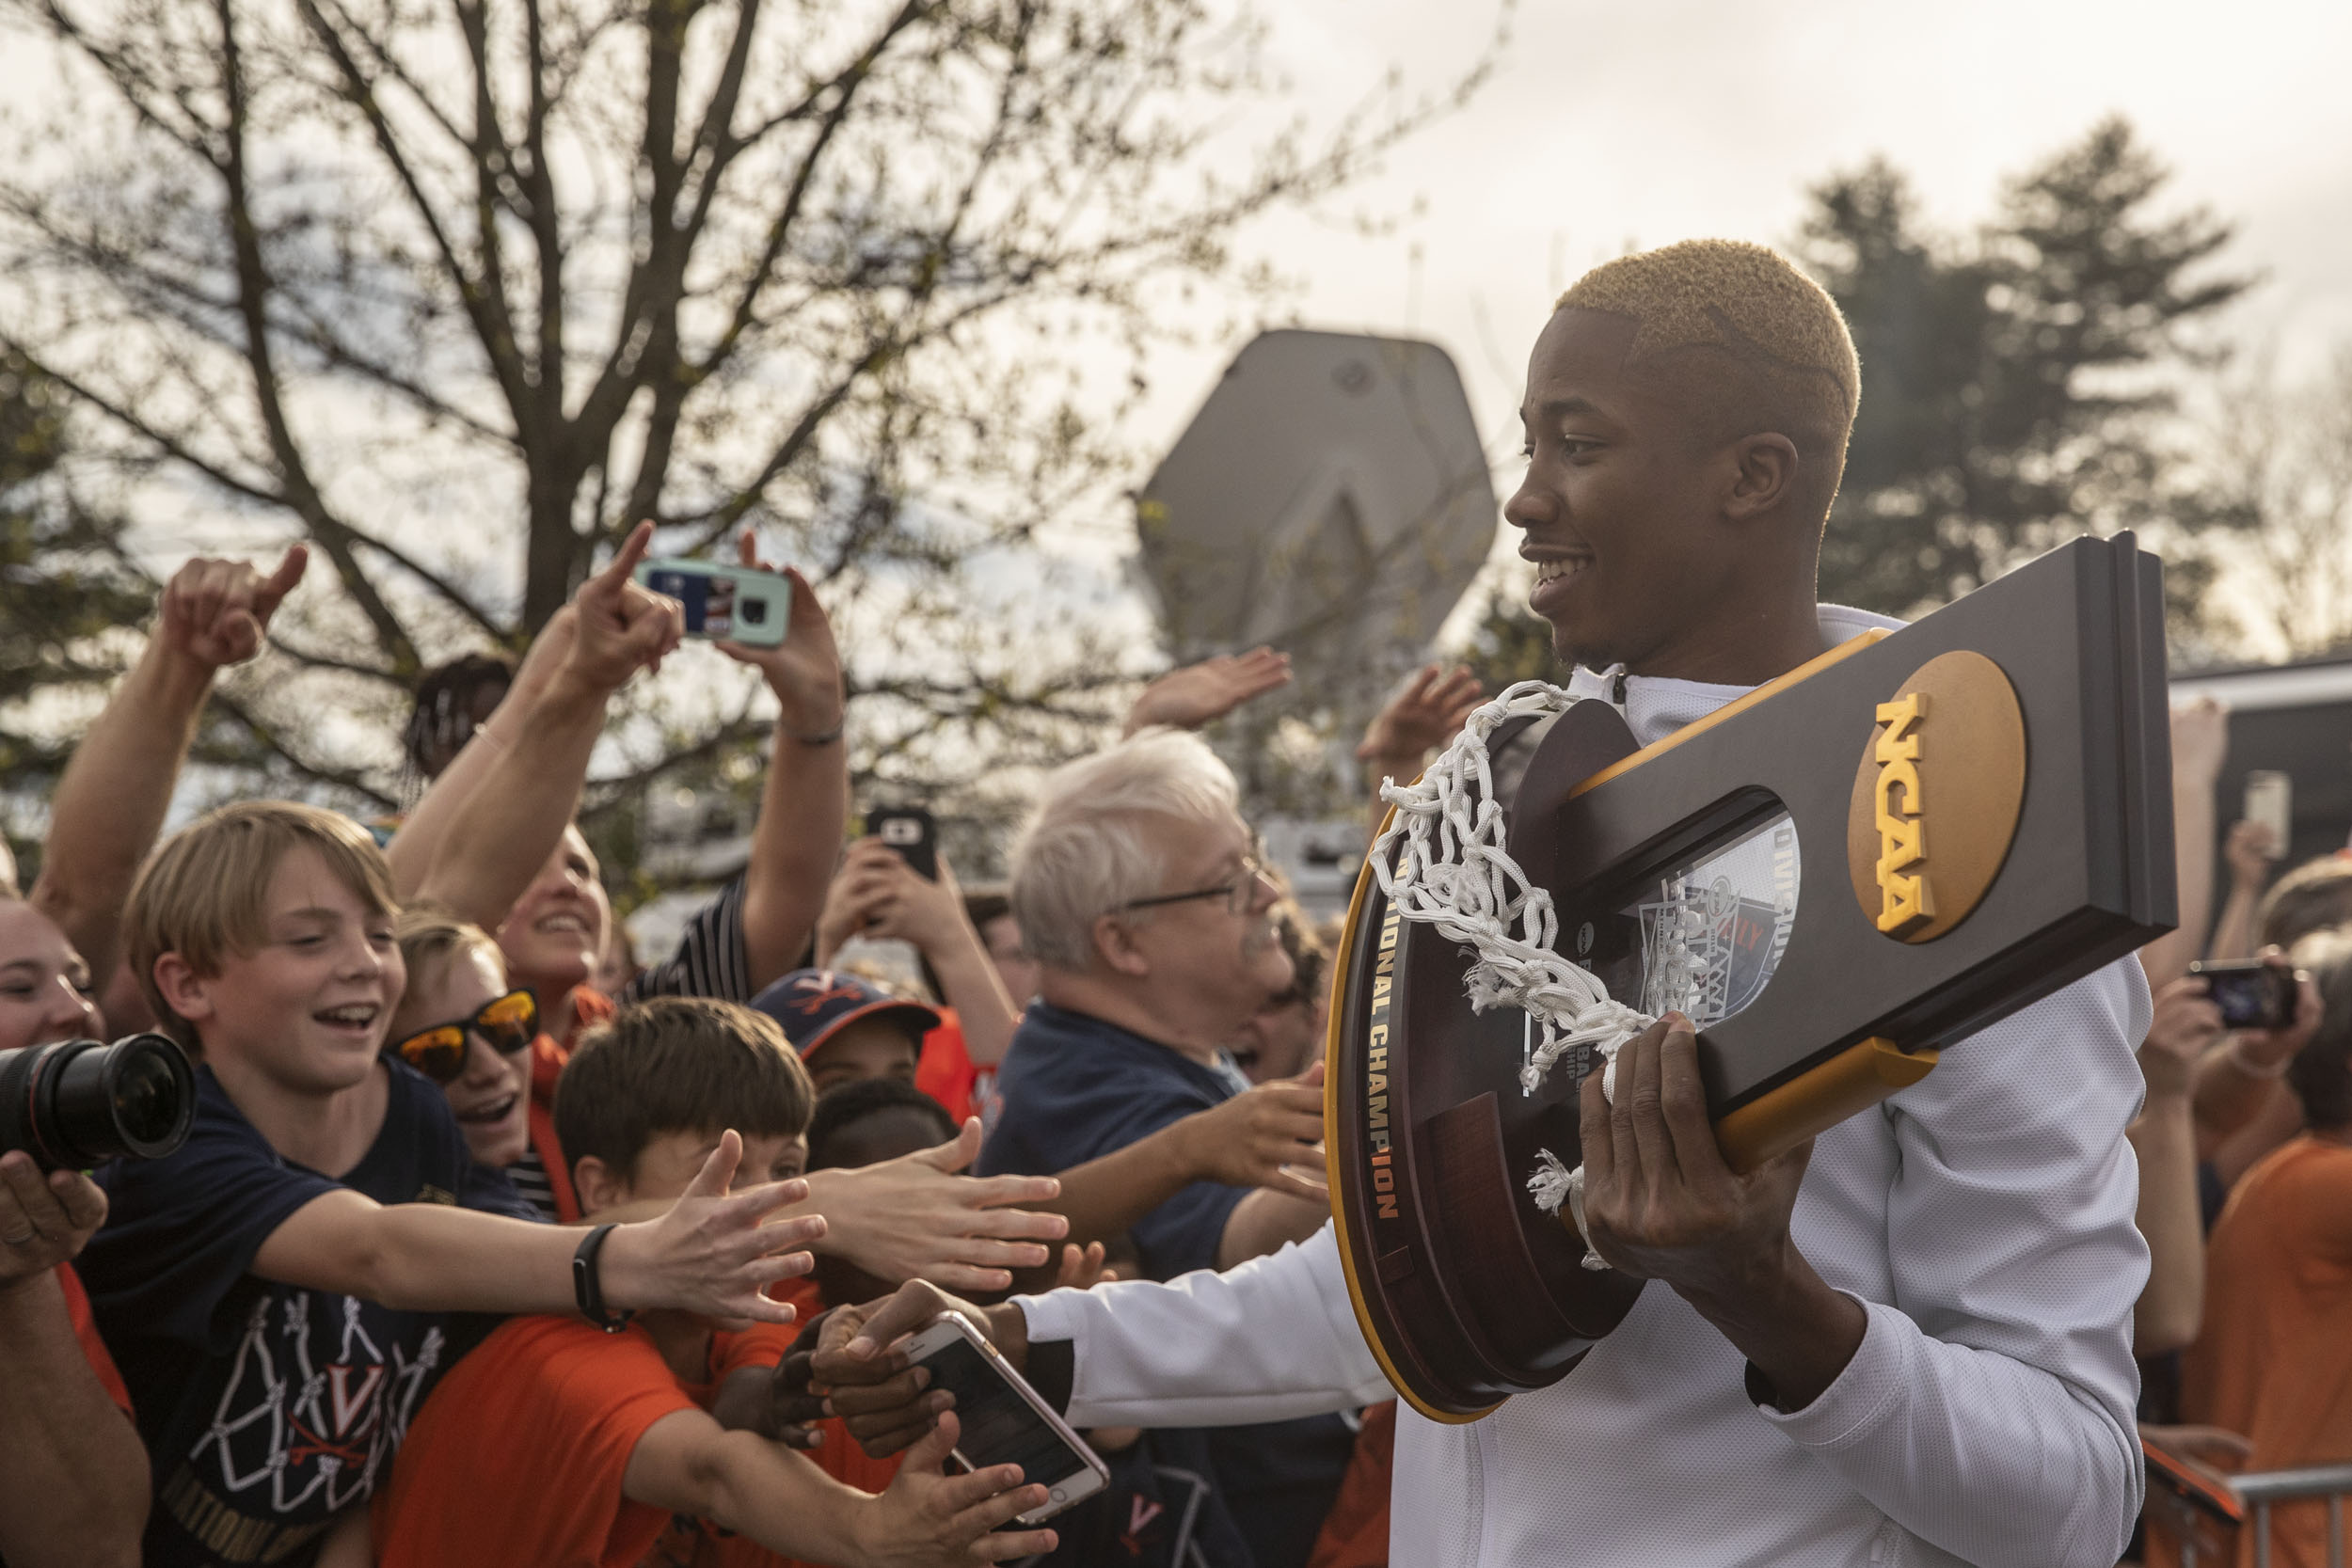 Mamadi Diakite carrying NCAA trophy and basketball net as he high fives the hands of the fans who gathered to welcome the basketball team home